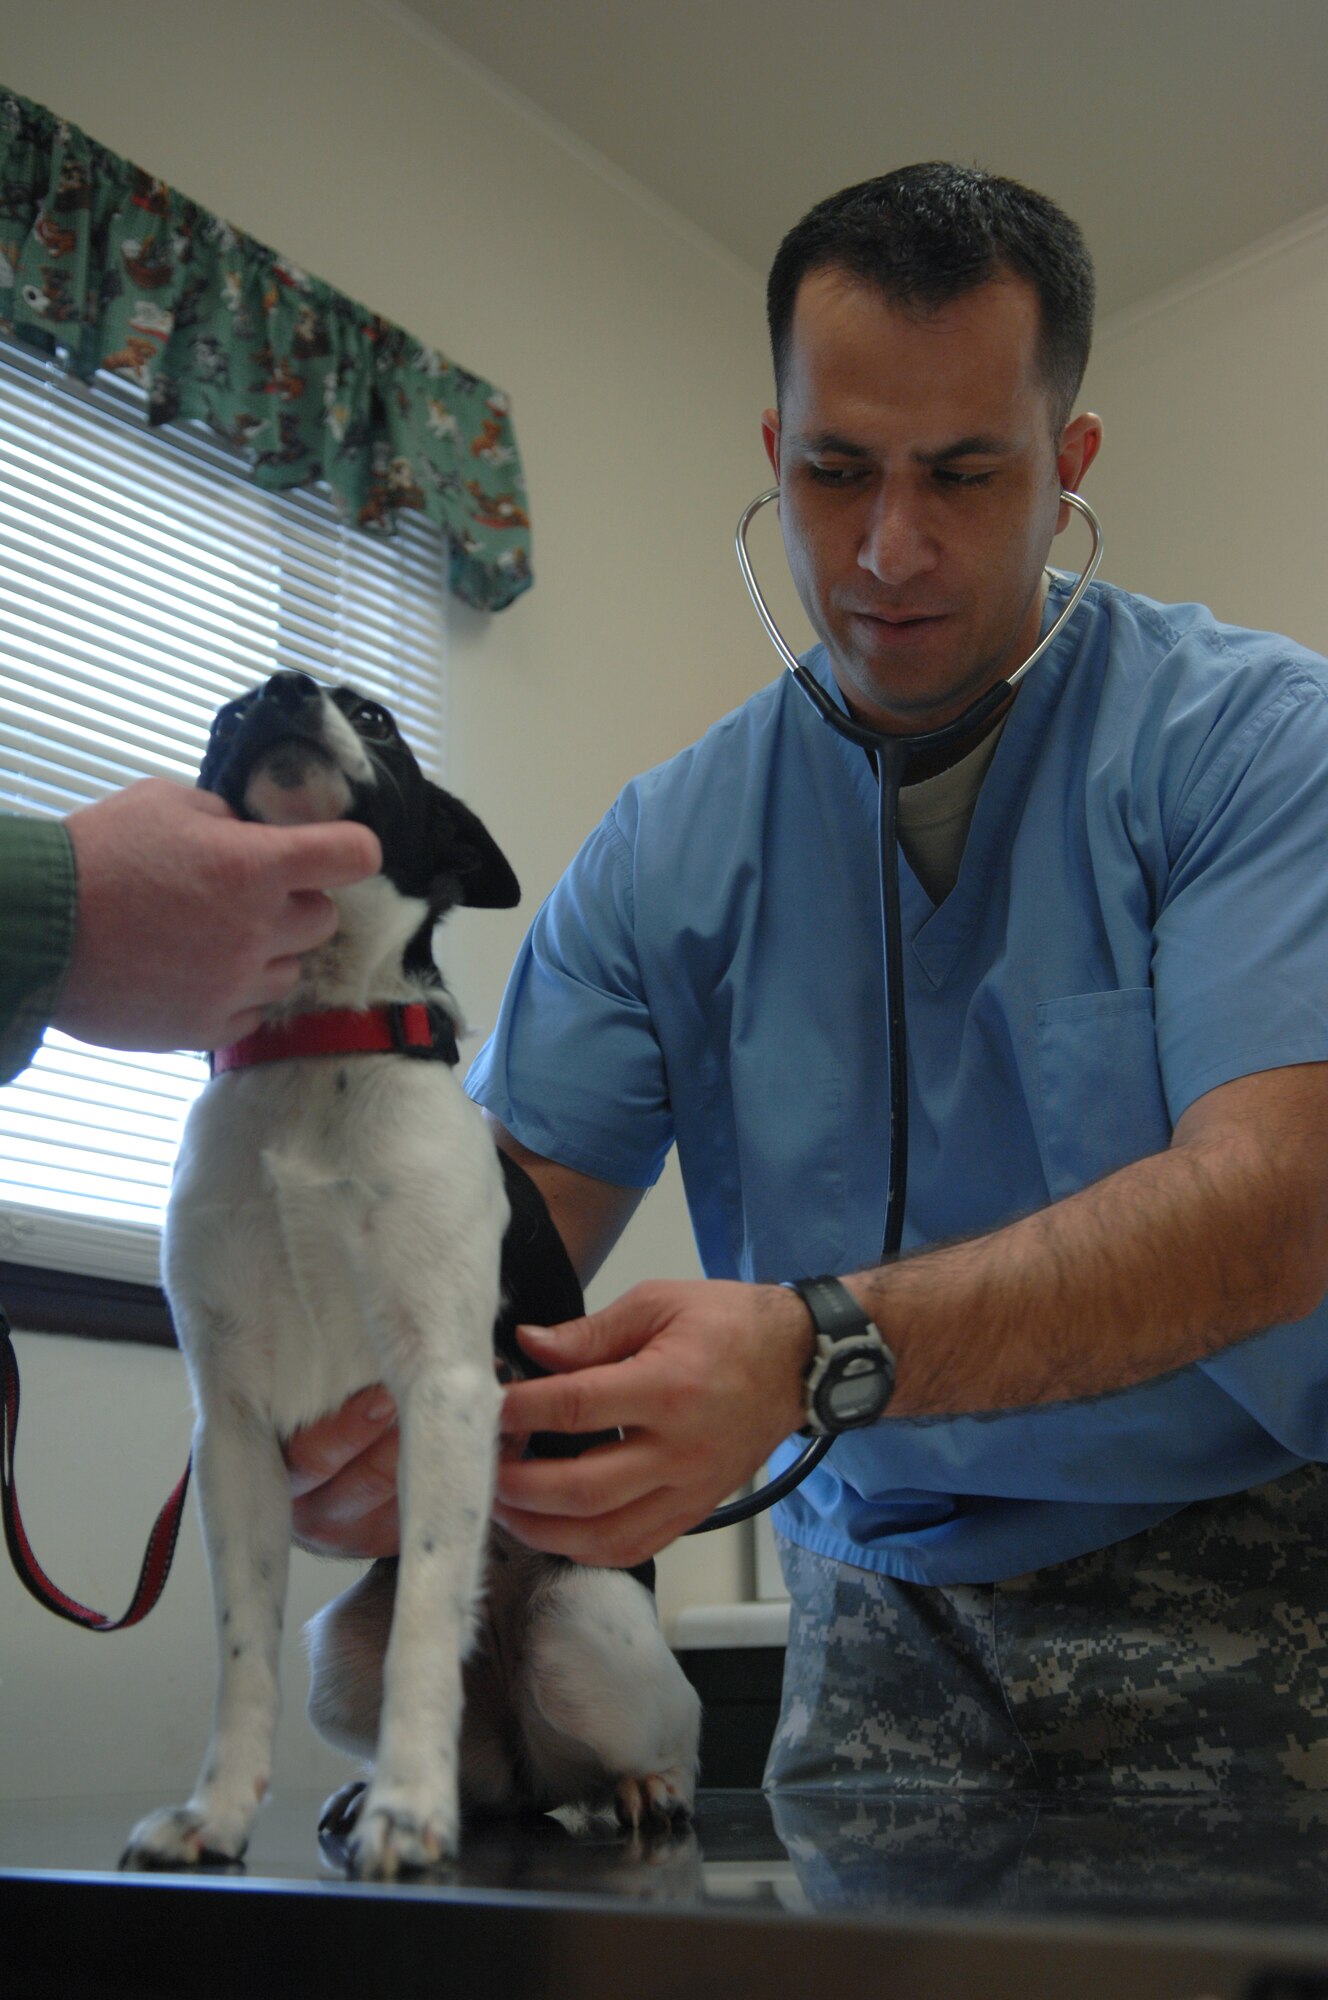 Staff Sgt. Eduardo Quezada, Army veterinarian technician, checks Daisy’s heart before administering her rabies vaccination and inserting her micro chip here Nov. 10. Daisy is the family pet of Tech. Sgt. Jeff Smith, 509th Communications Squadron member.  The clinic aids service members in keeping pets legal, safe and healthy.  (U.S. Air Force Photo/ Senior Airman Jessica Mae Snow) (Released)